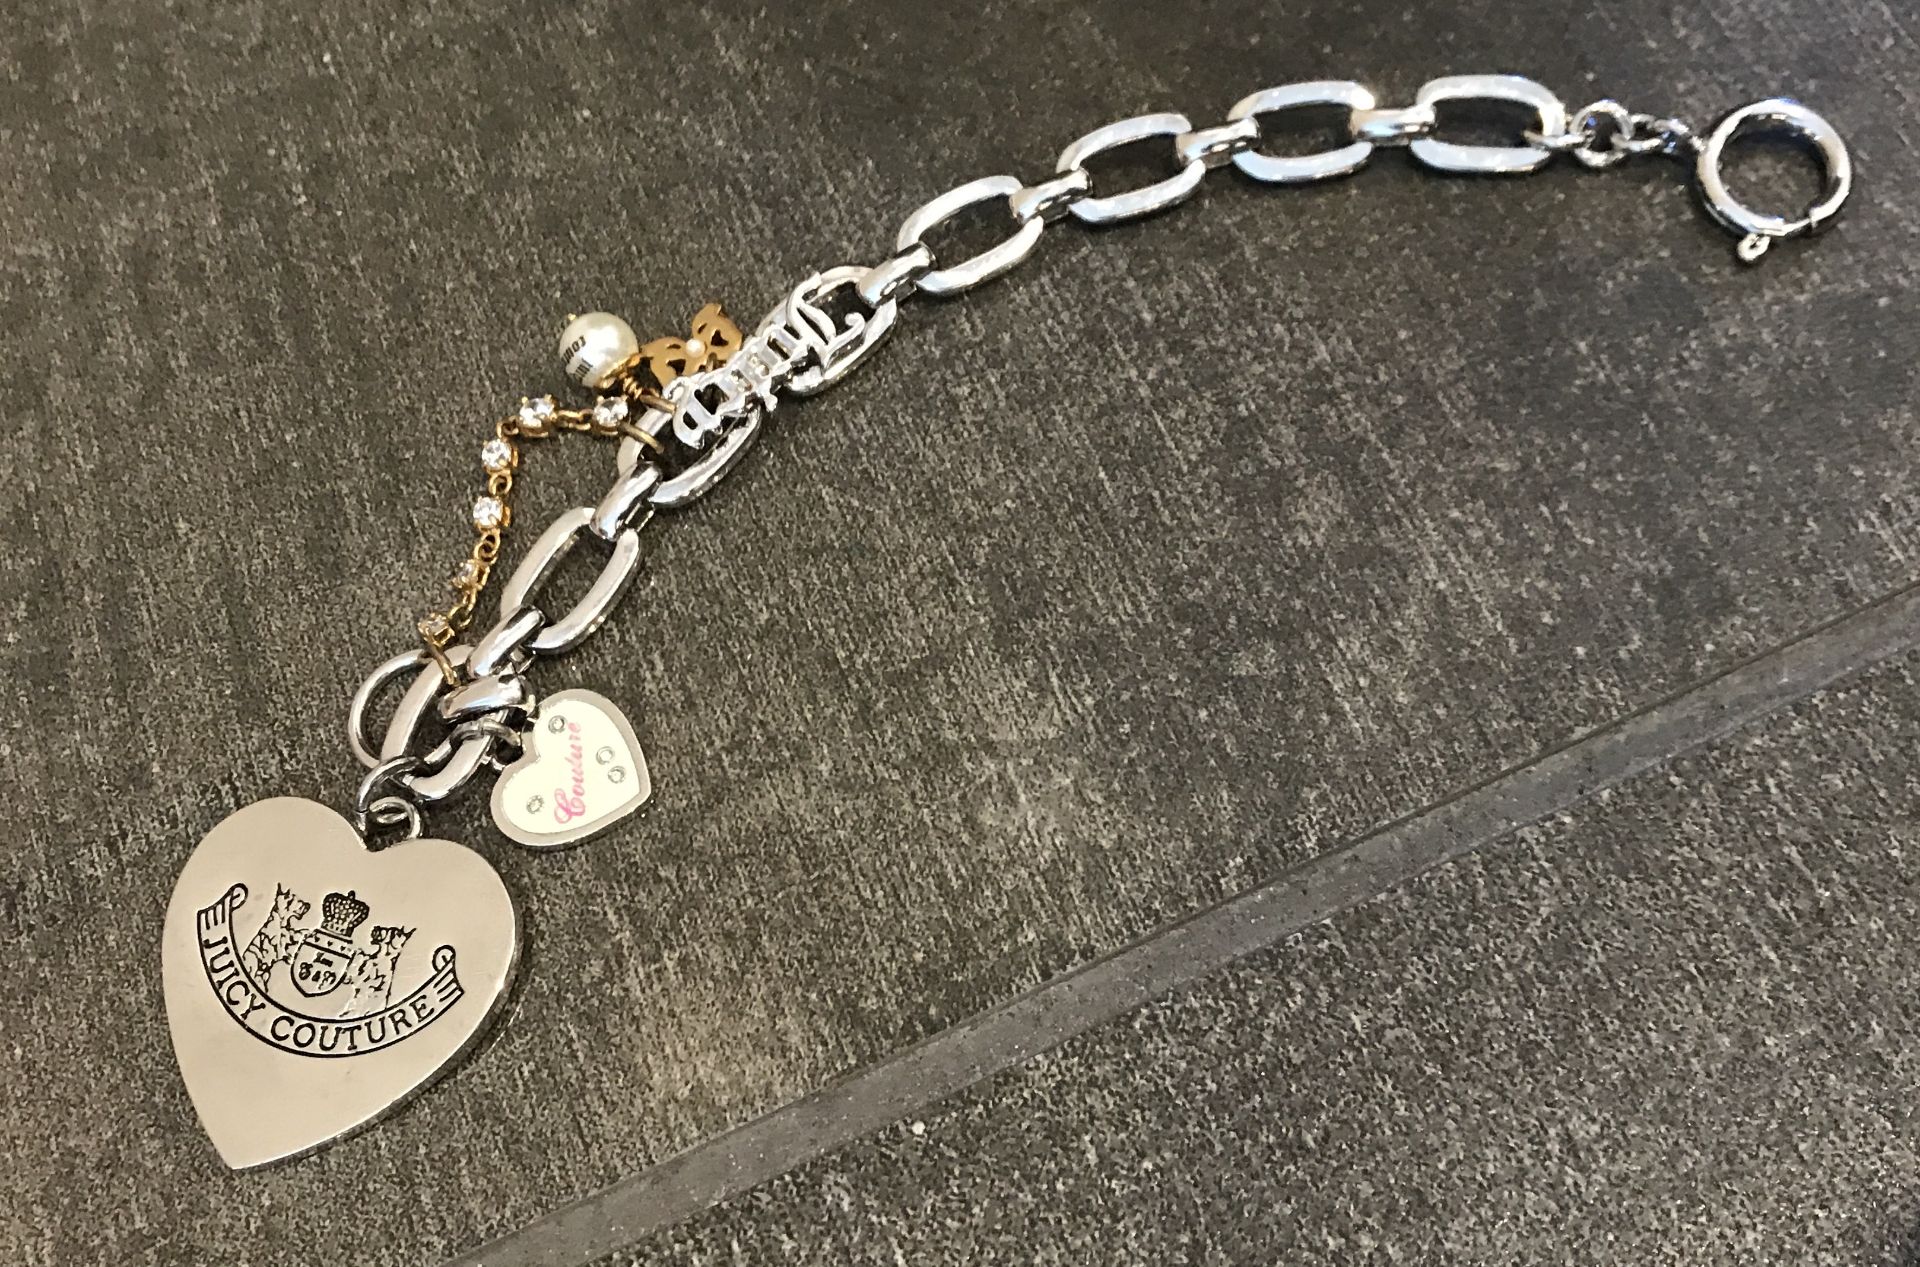 JUICY COUTURE CHARM BRACELET AND MATCHING NECKLACE - Image 3 of 5